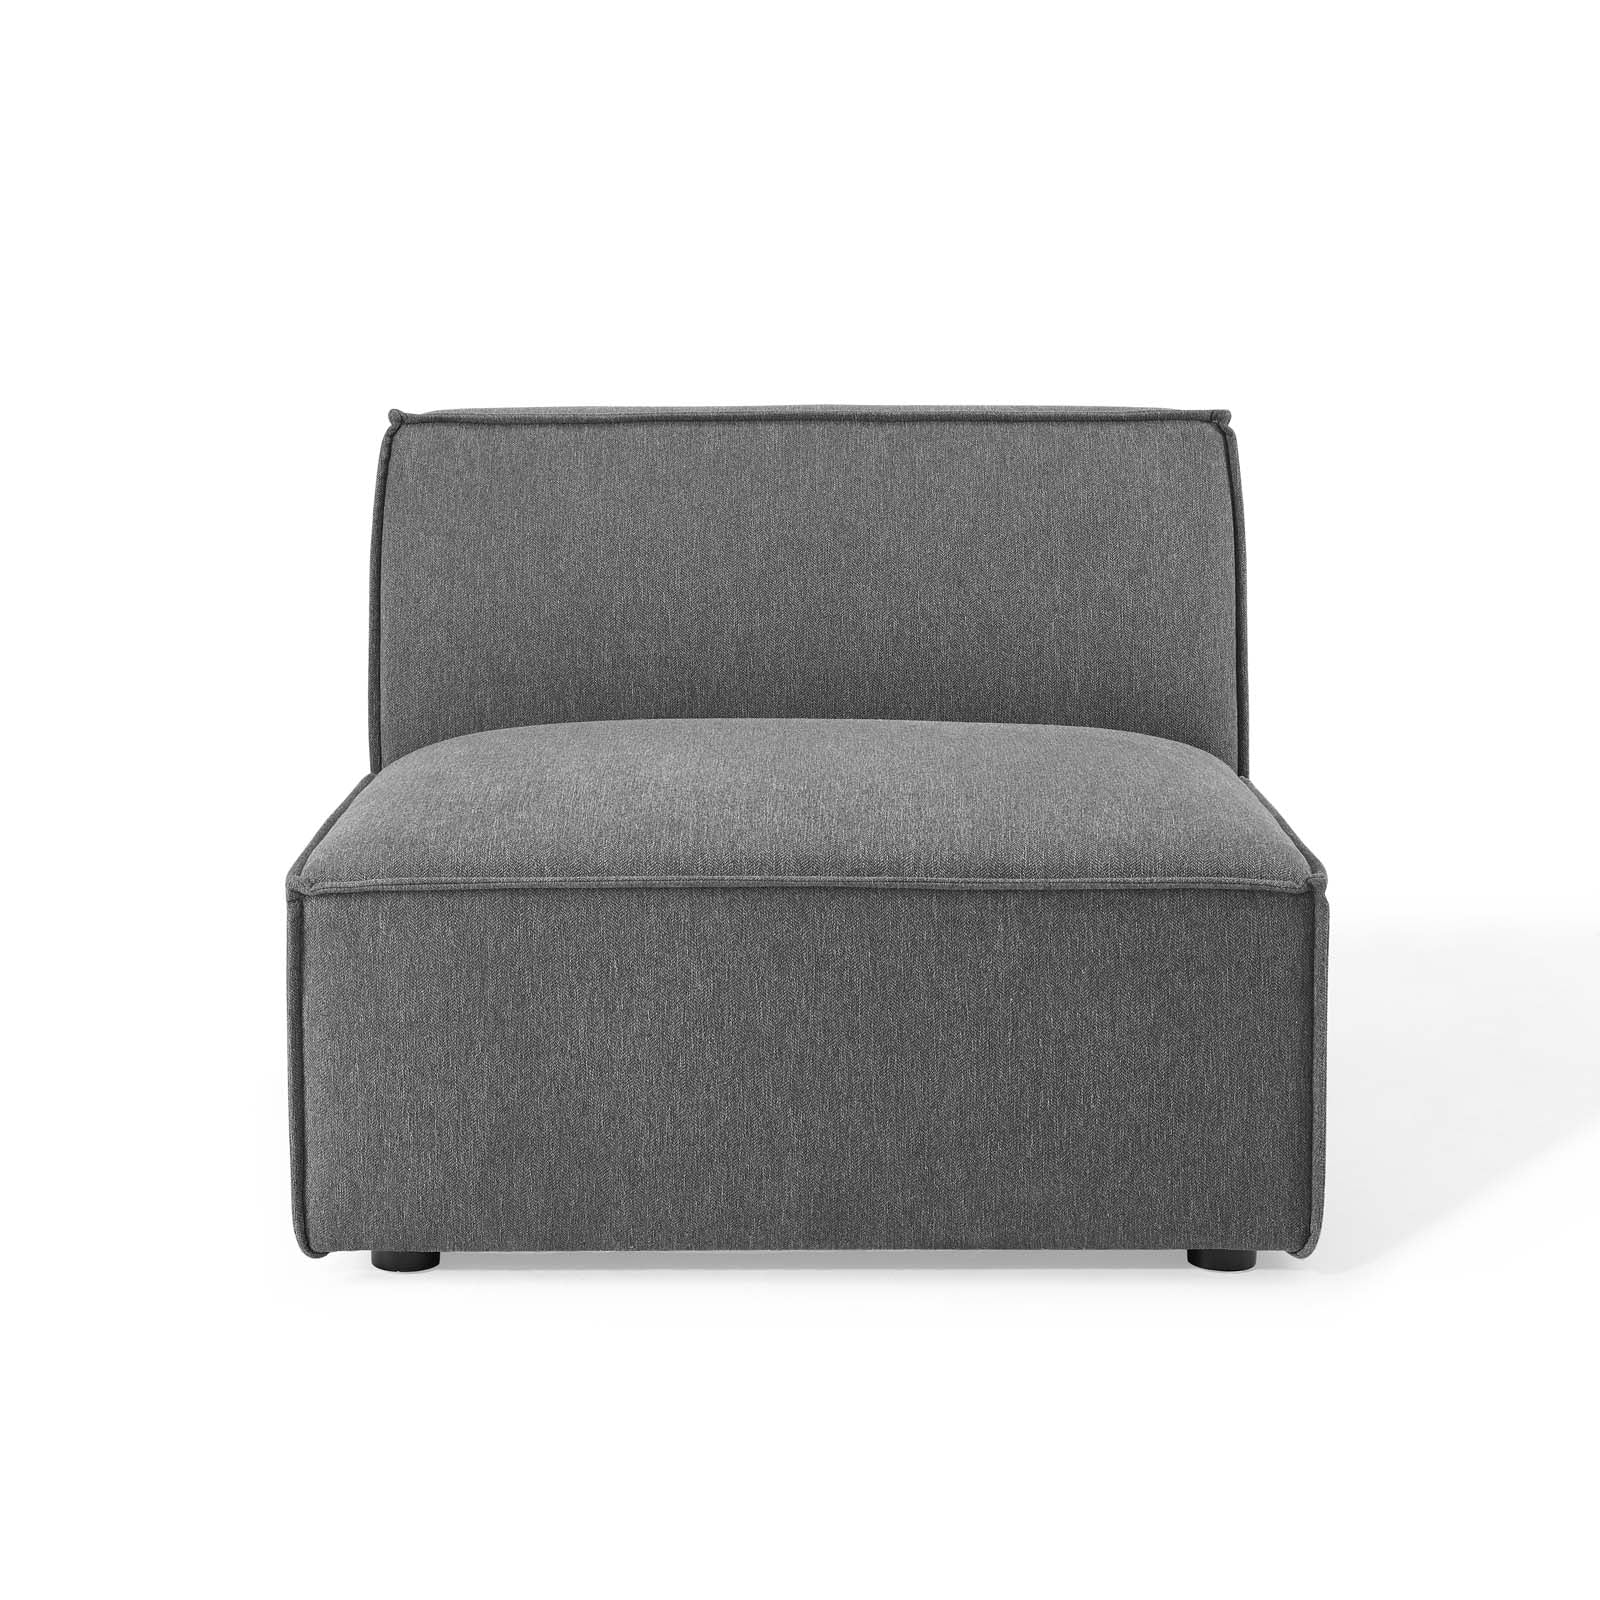 Modway Accent Chairs - Restore Armless Chair Charcoal